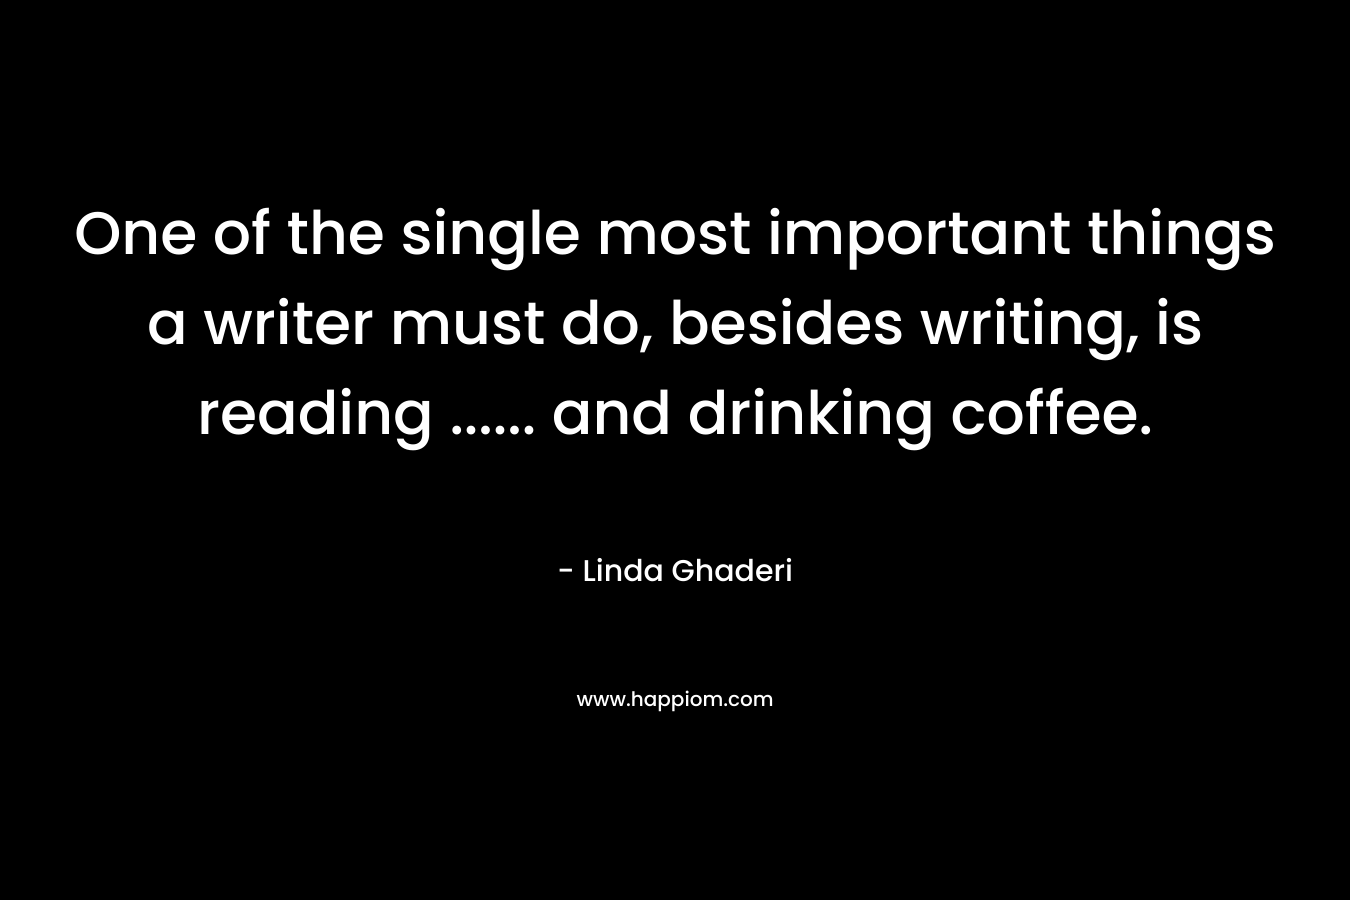 One of the single most important things a writer must do, besides writing, is reading …… and drinking coffee. – Linda Ghaderi